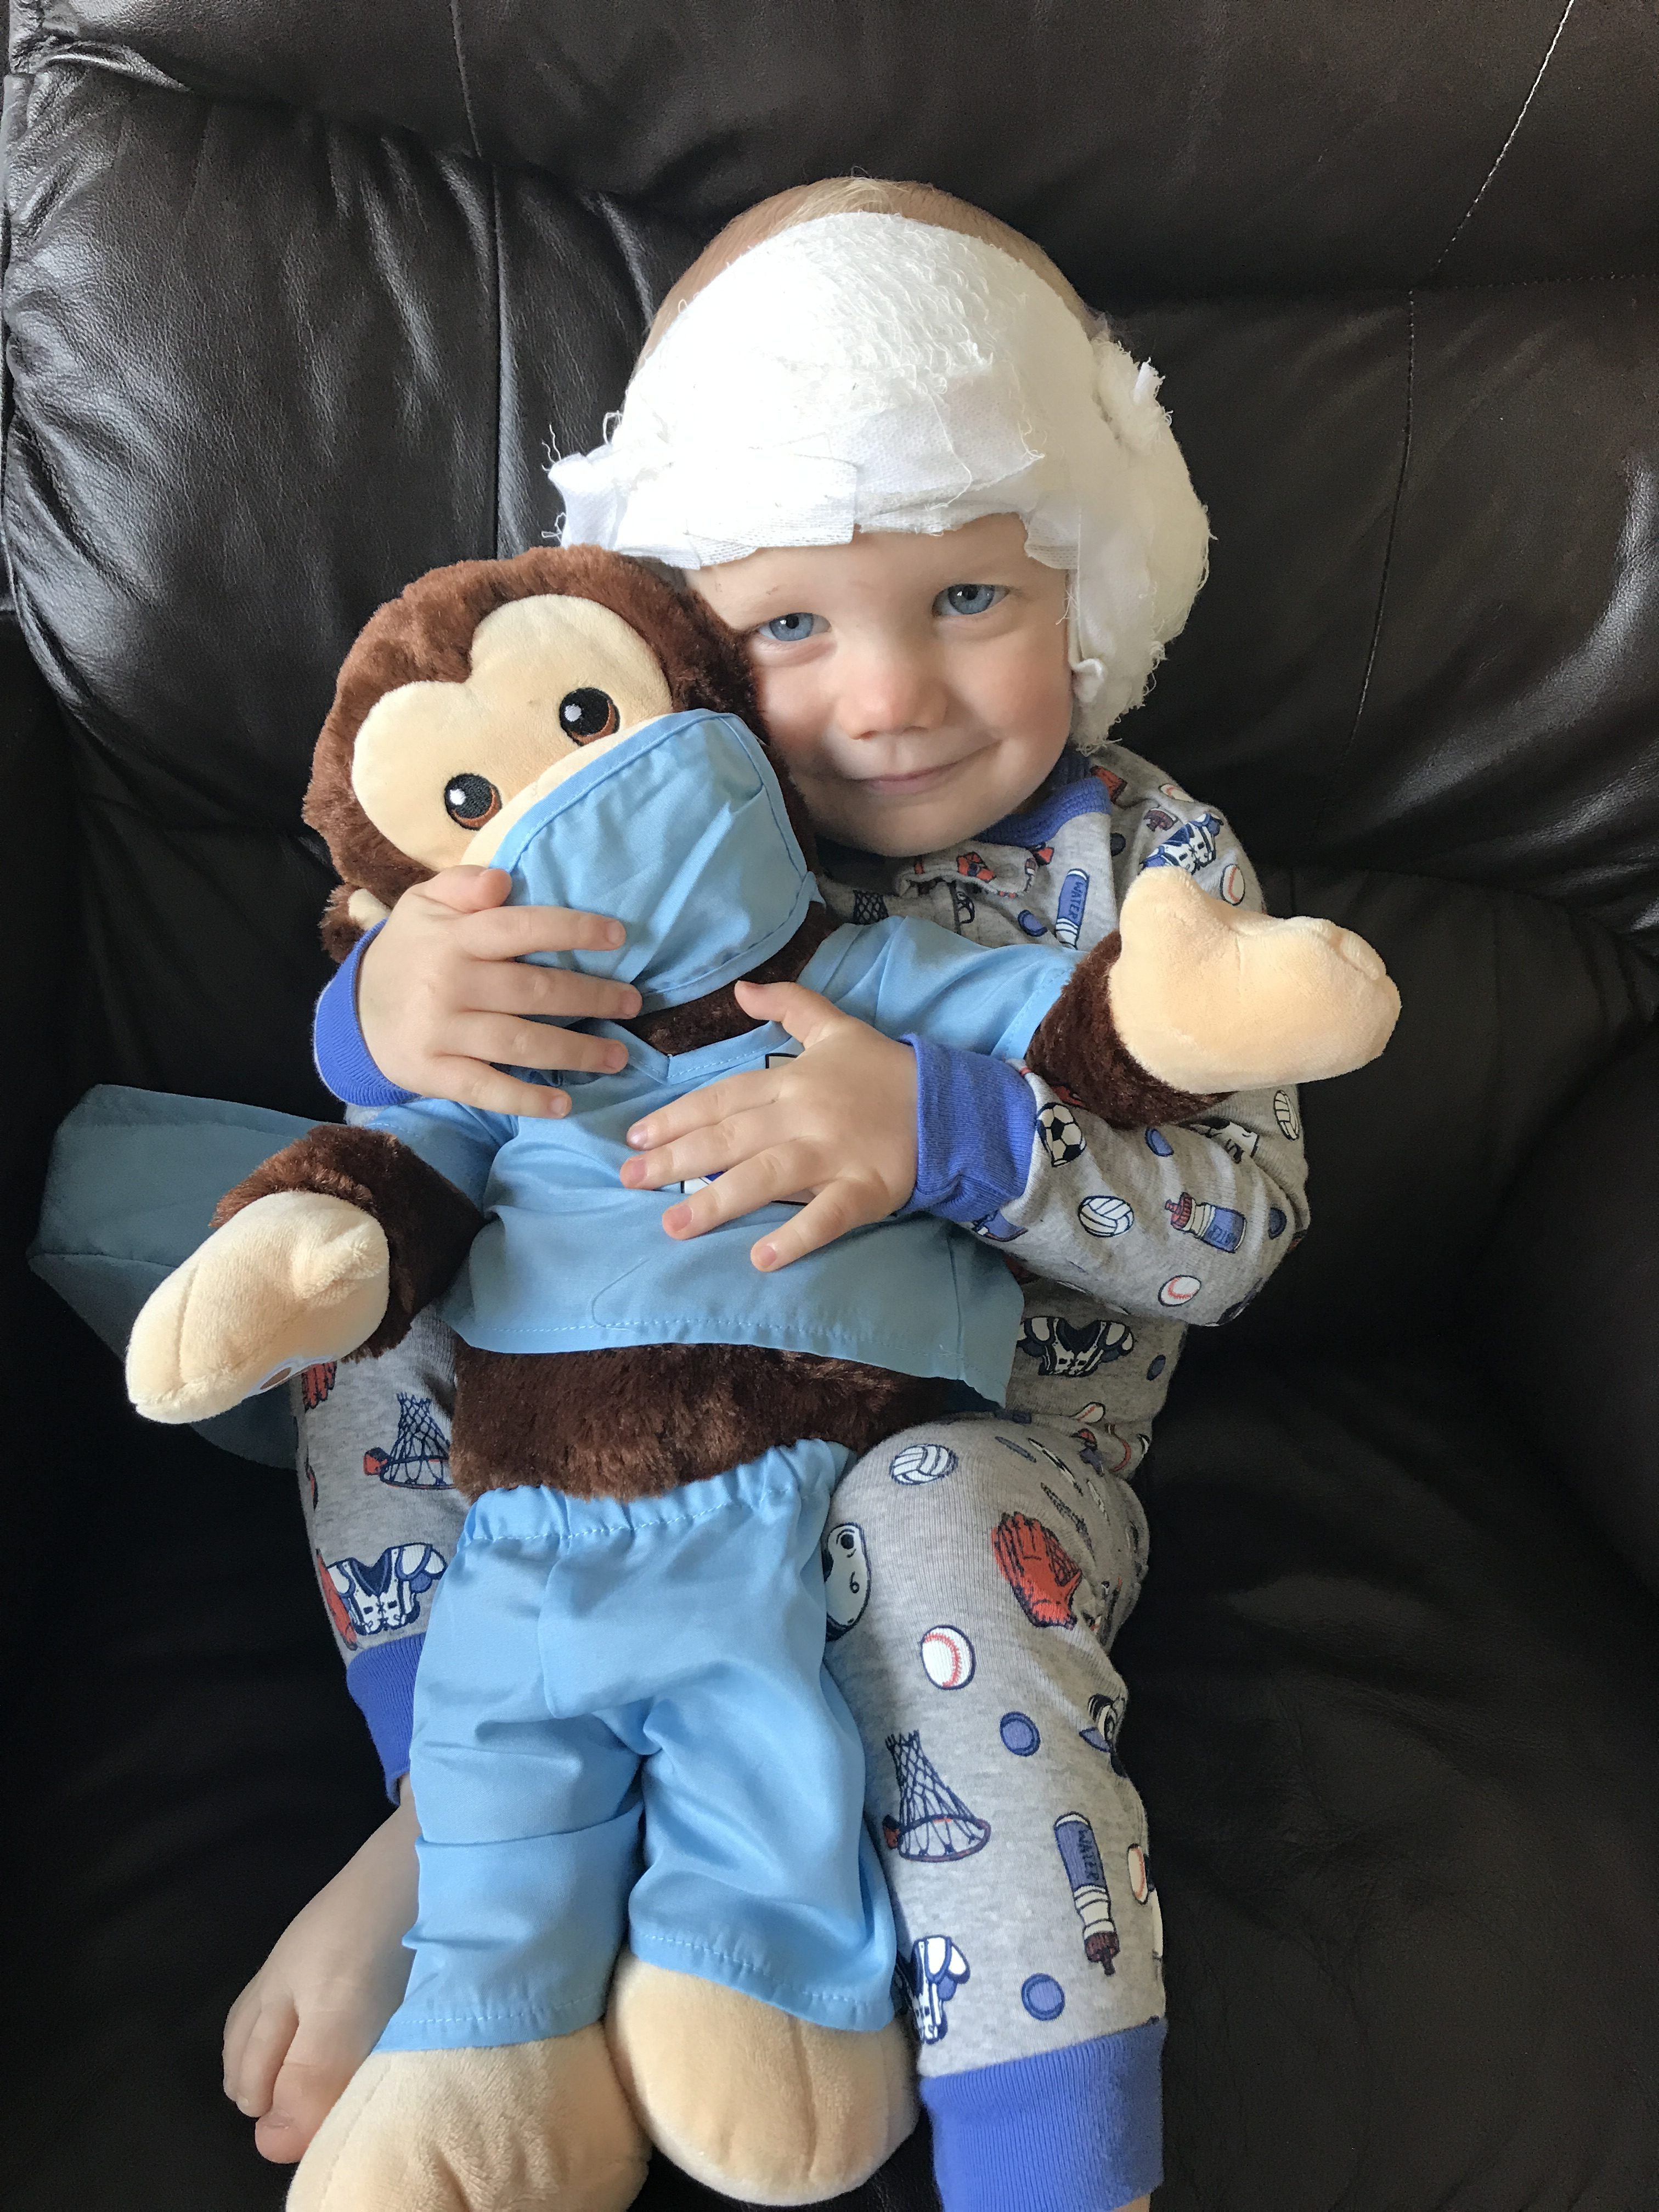 Noah after cochlear implant surgery, prior to his cochlear implant activation day